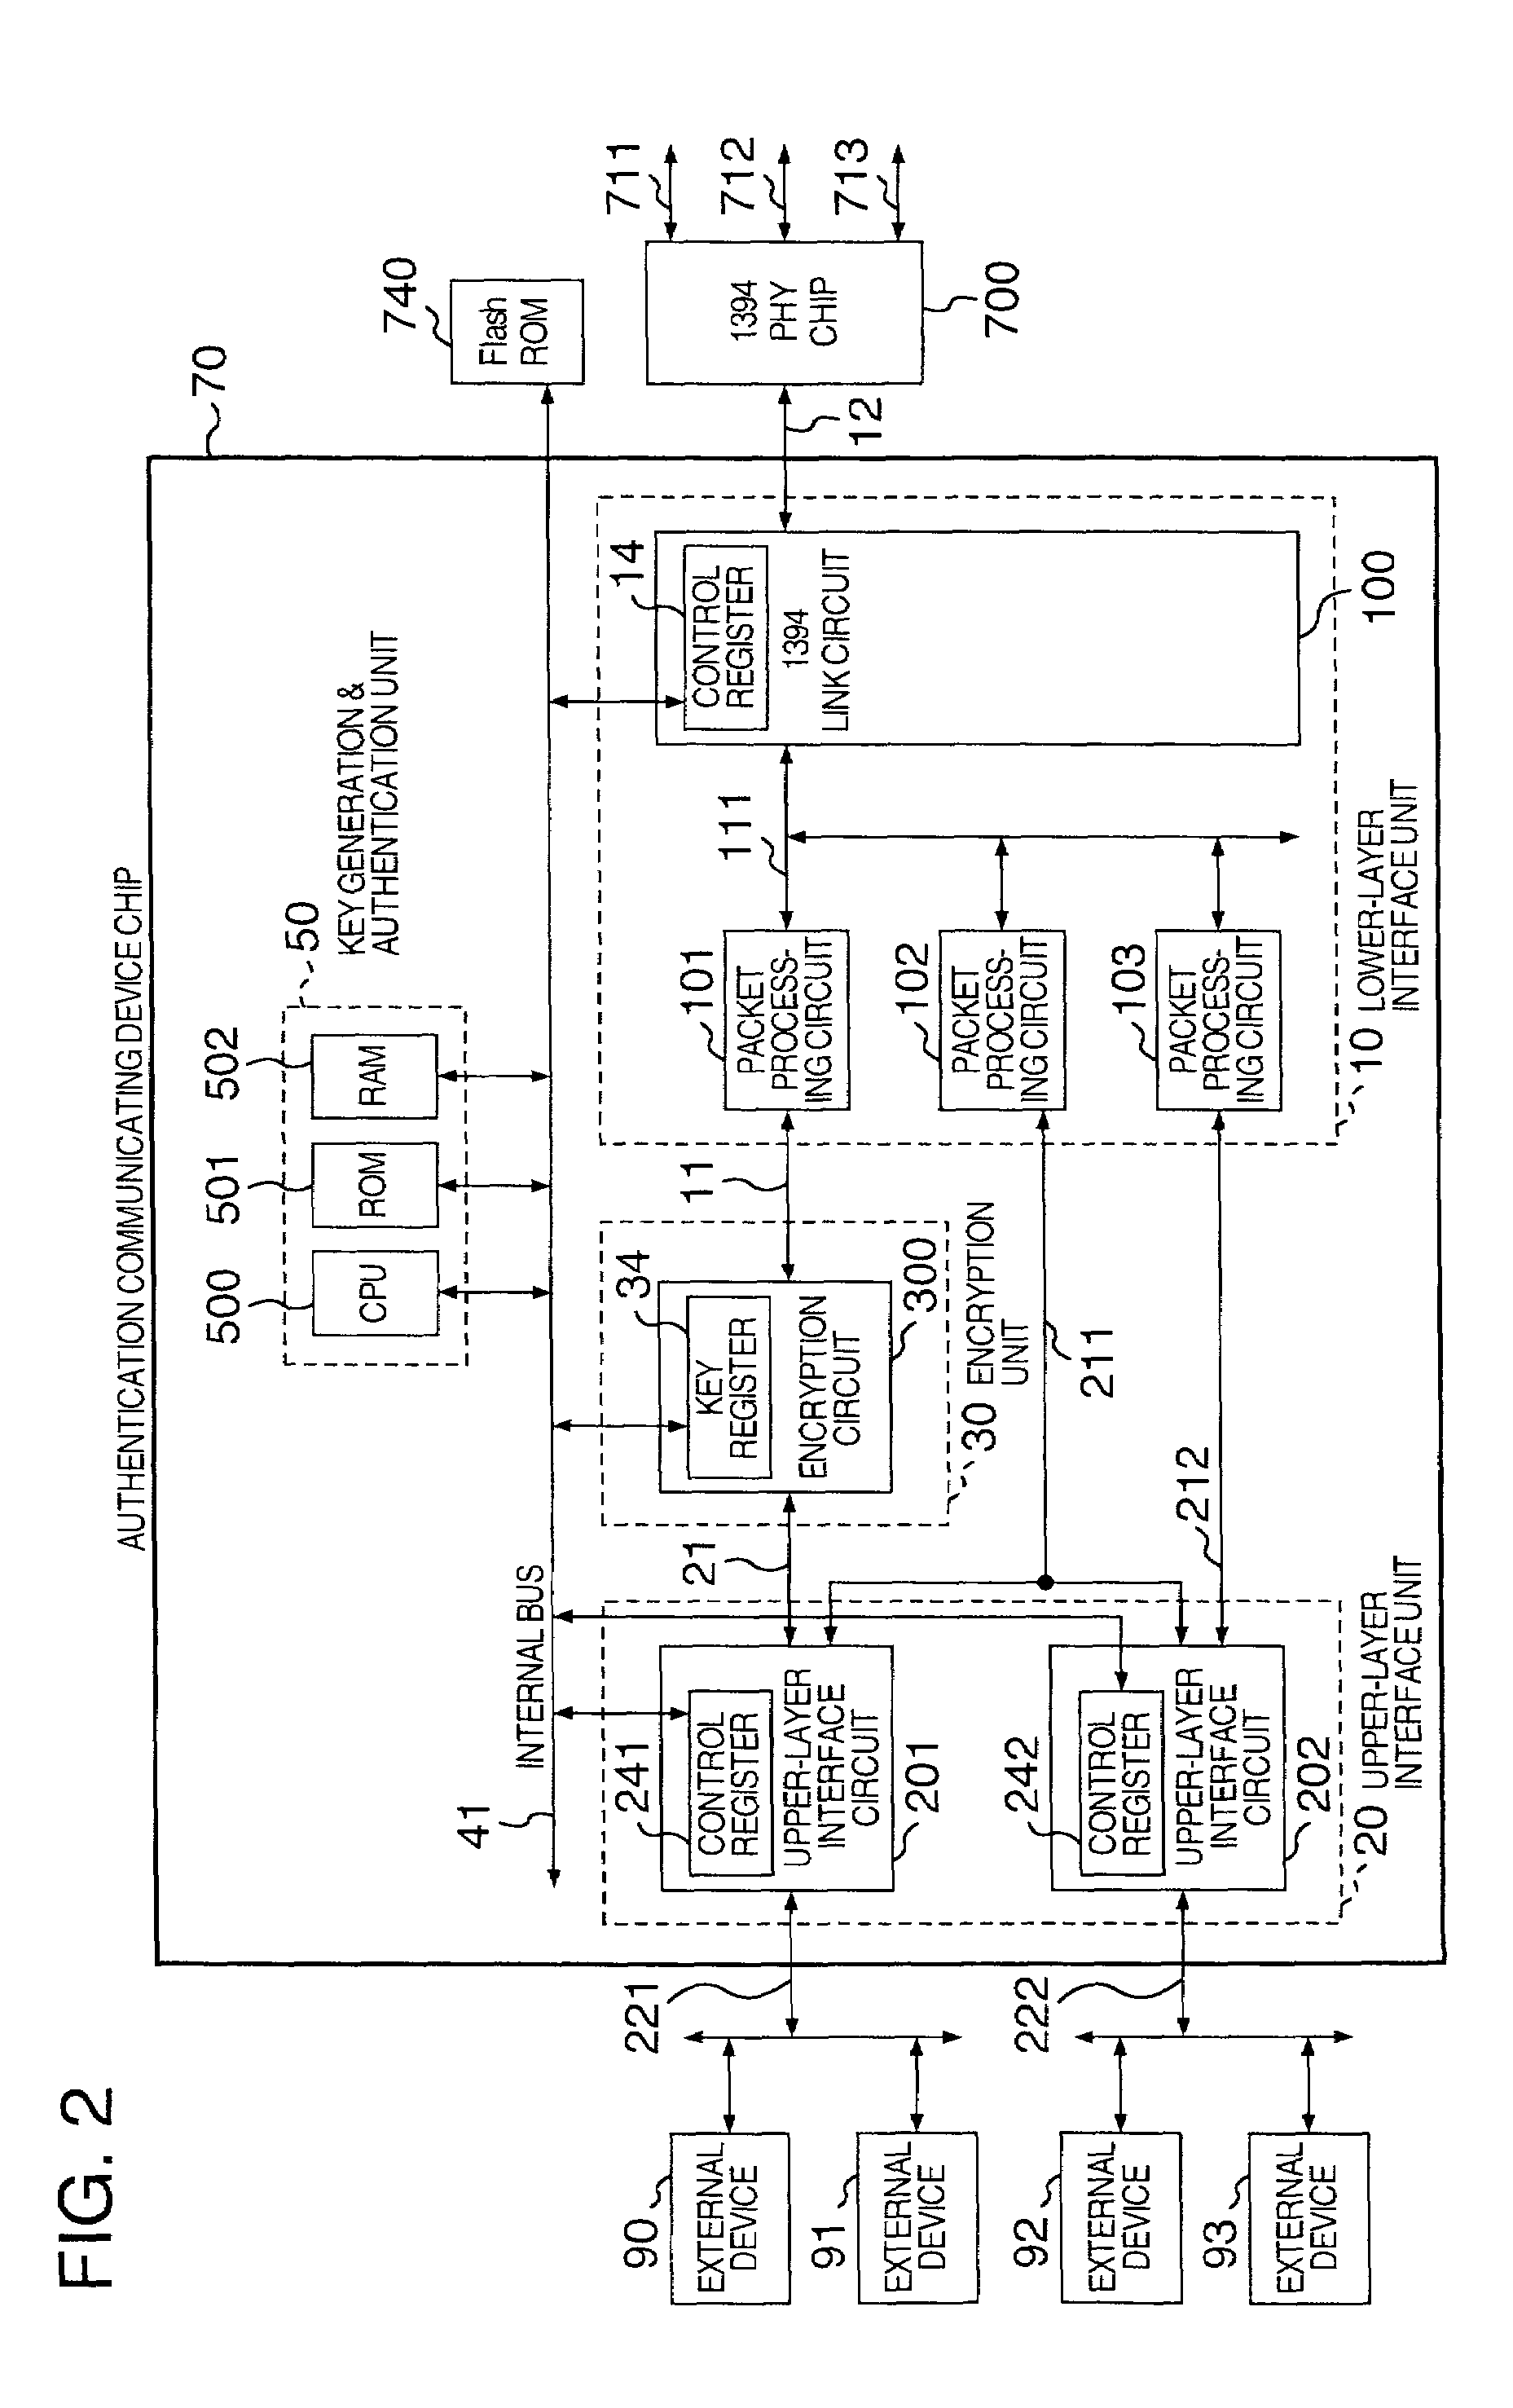 Authentication communicating semiconductor device